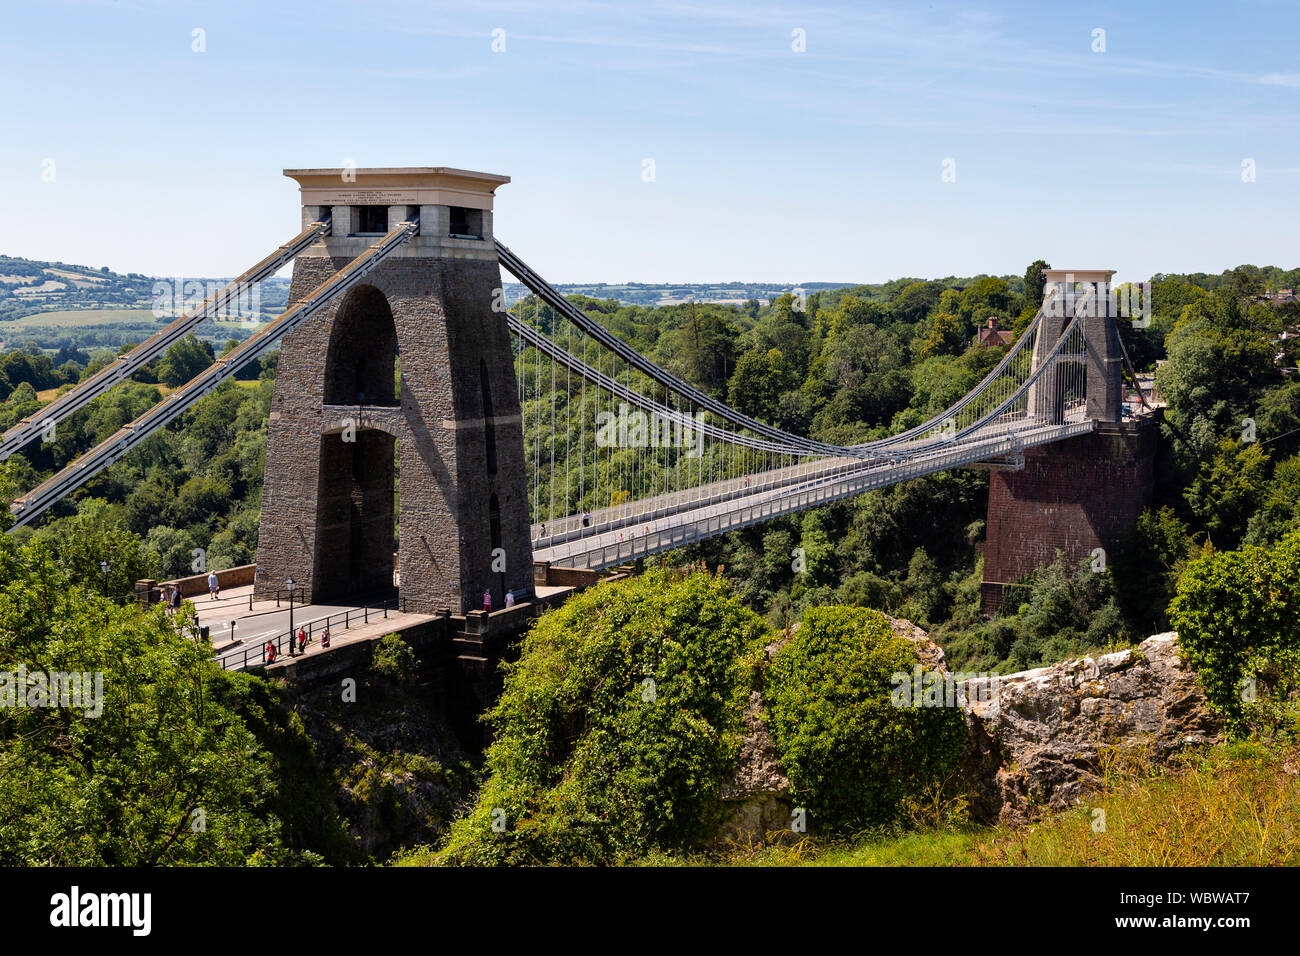 Clifton suspension bridge, over the Avon Gorge, Bristol. Designed by Isambard Kingdom Brunel and completed in 1864. Stock Photo